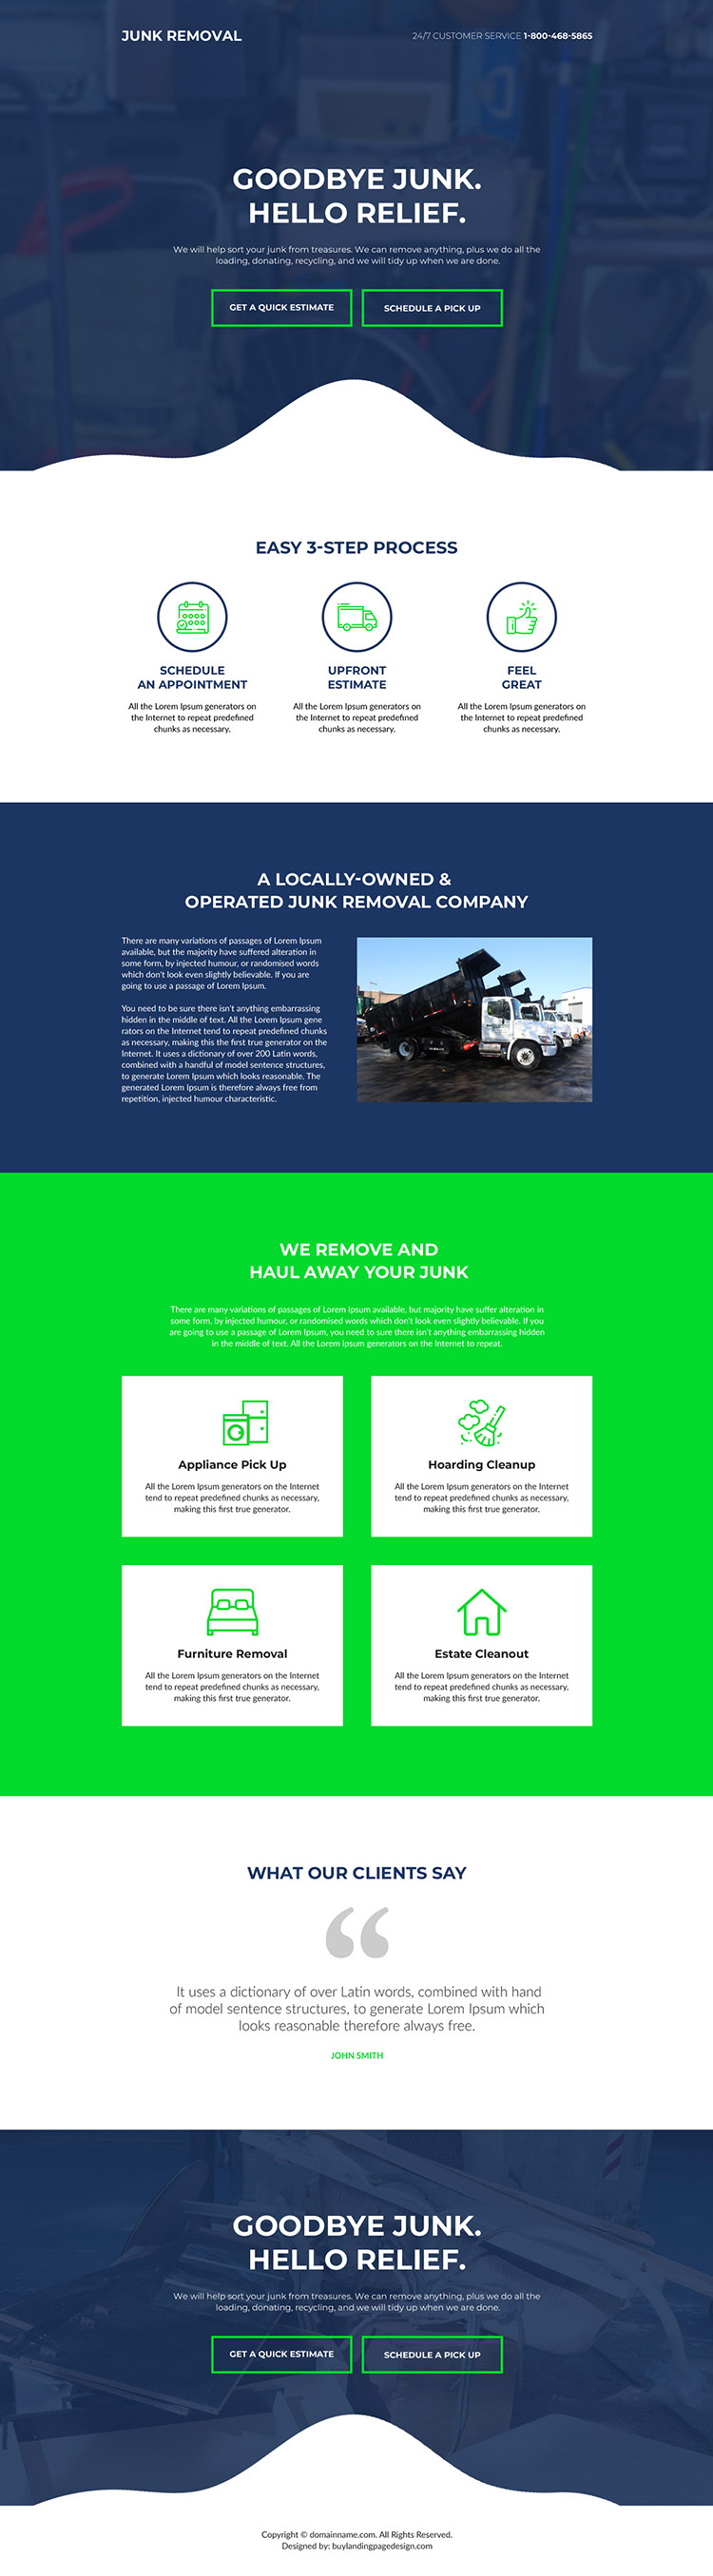 junk removal service bootstrap landing page design